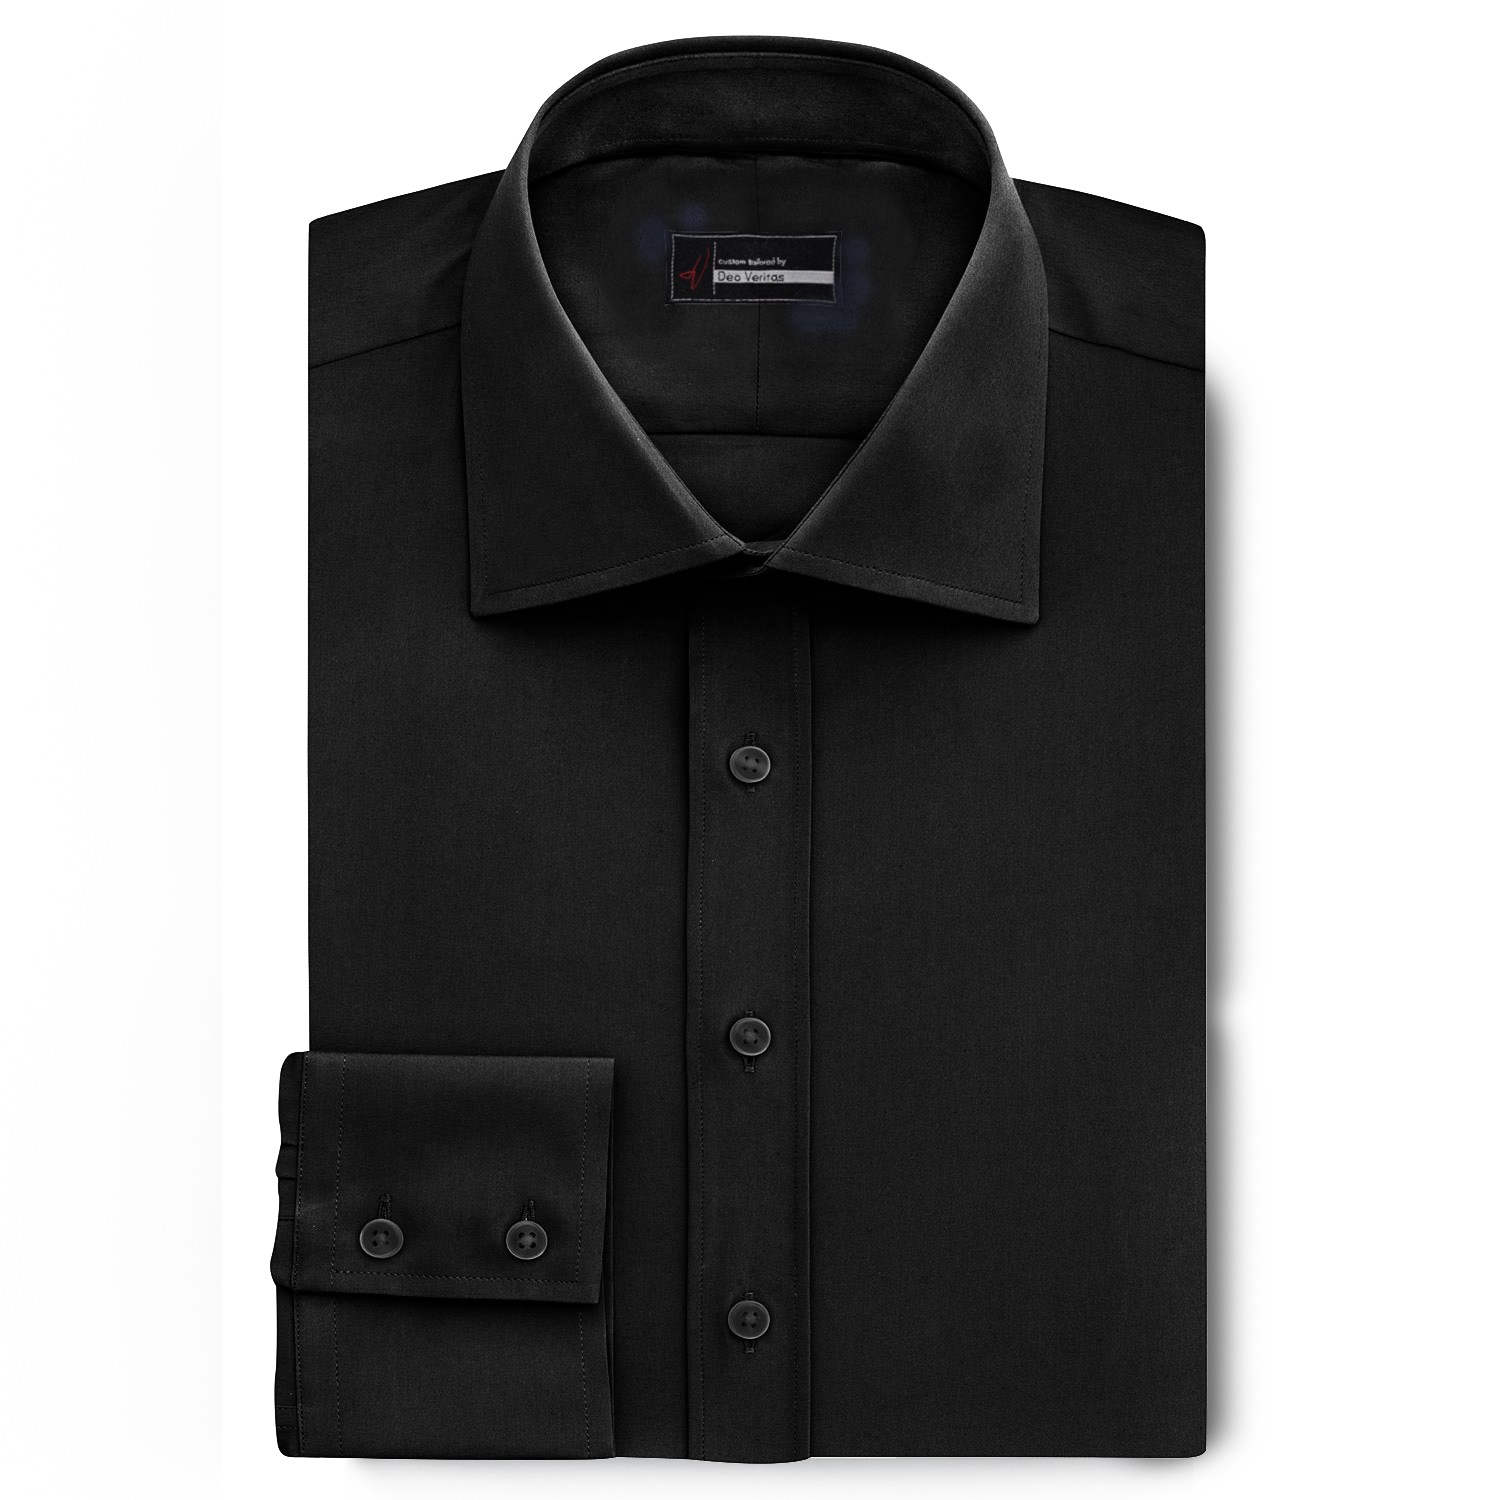 The Mens Black Dress Shirt: Our Definitive Style & Buying Guide